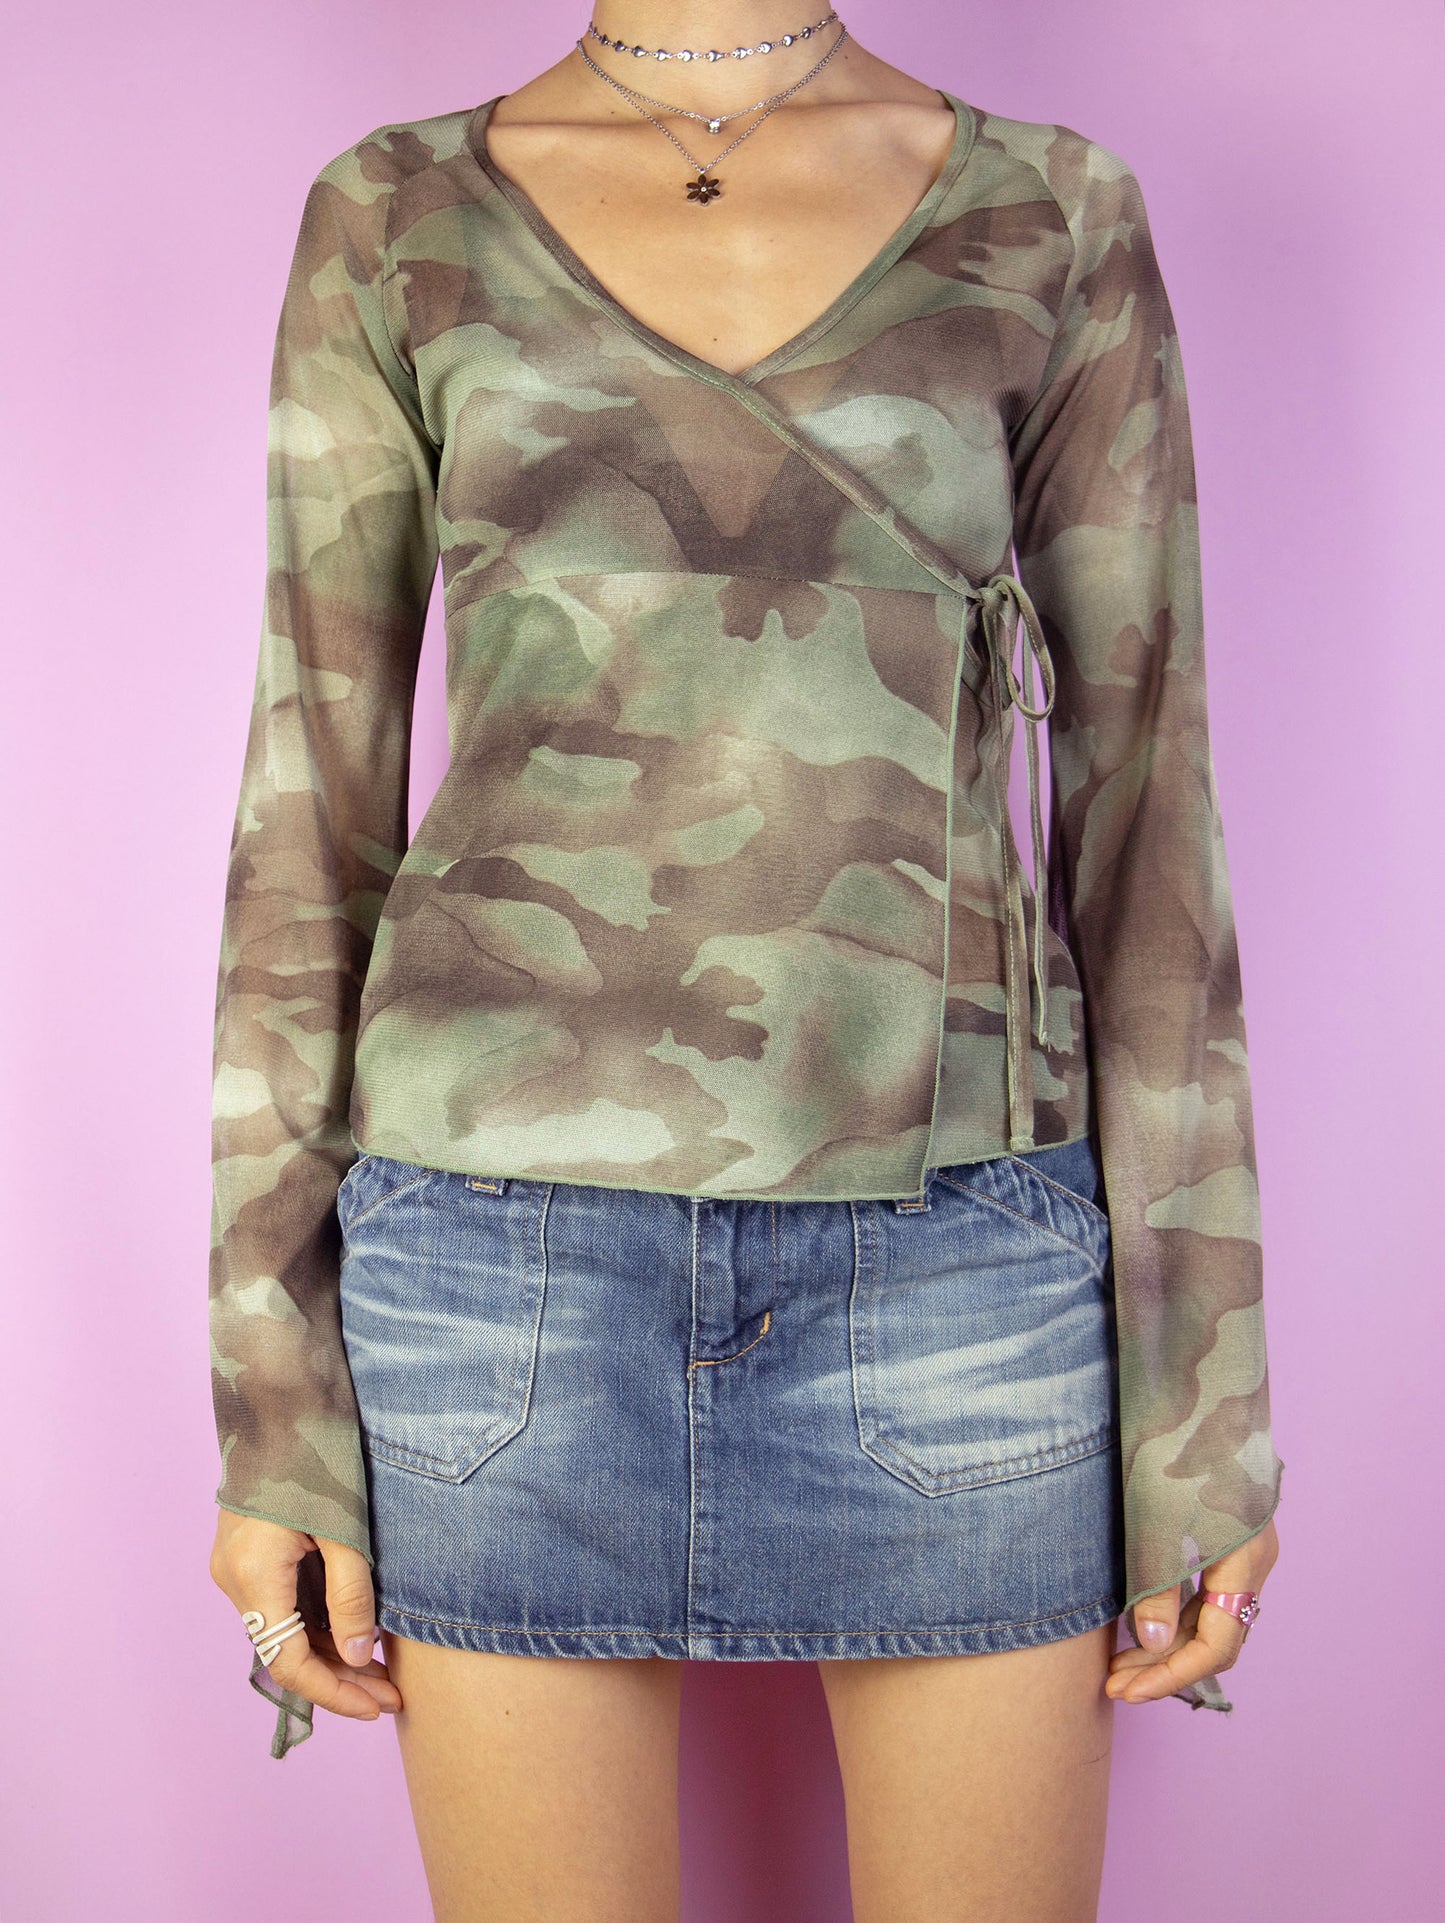 The Y2K Camouflage Mesh Top is a vintage green and brown camo print semi-sheer mesh wrap top with side tie detail and bell sleeves. Cyber grunge 2000s graphic shirt.